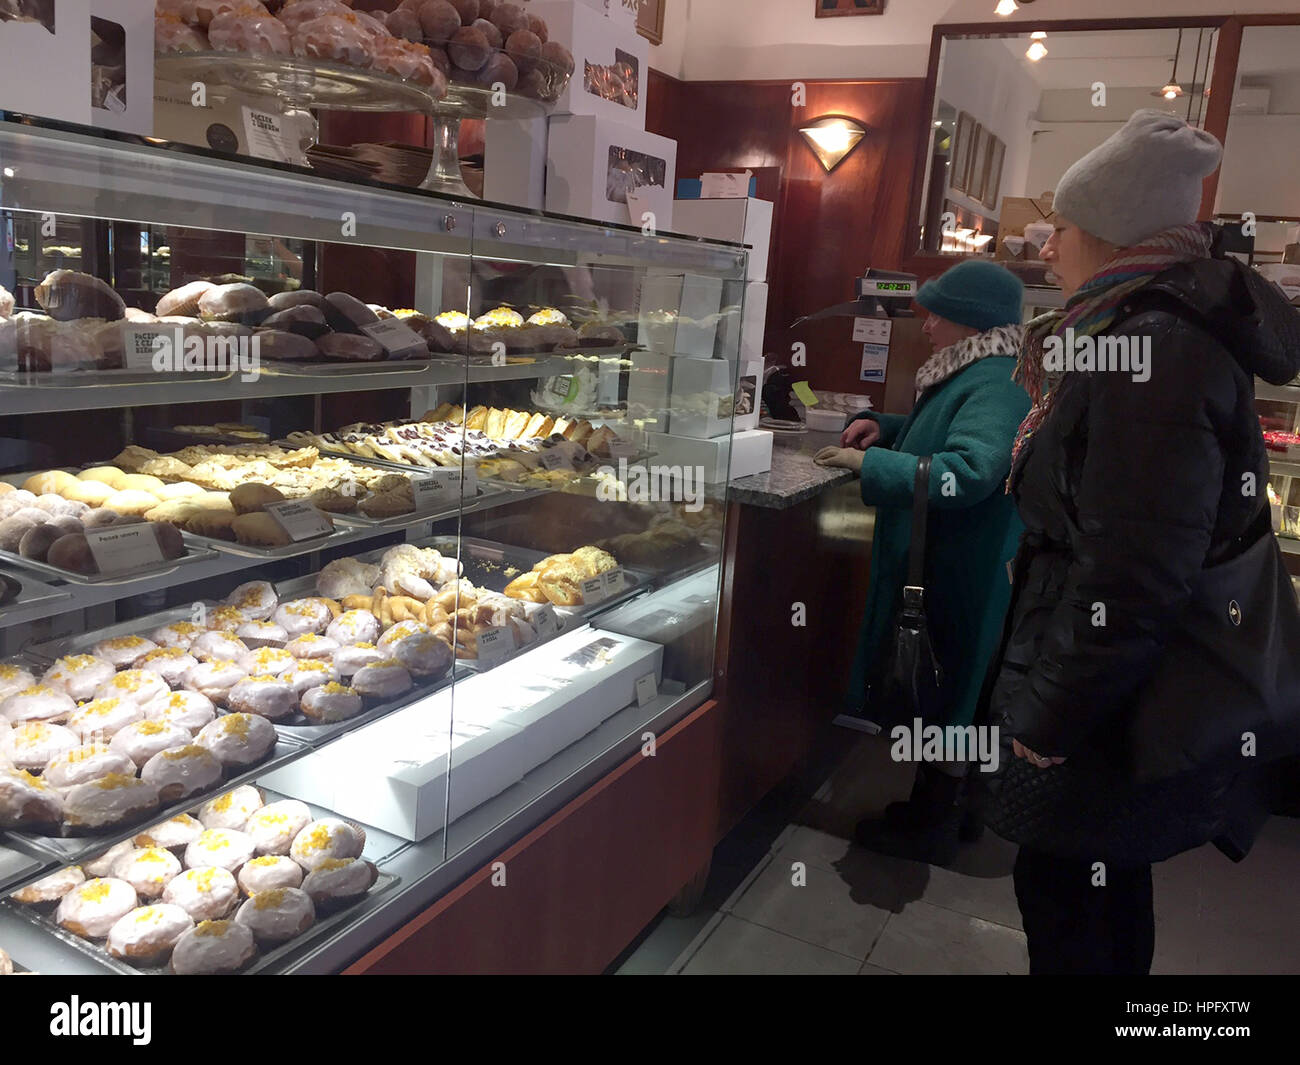 Warsaw, Ppland. 22nd Feb, 2017. Pancakes and Faworki (angel wings), a typical Polish pastry, being presented in a confectionery shop on the Nowy Swiat in Warsaw, Ppland, 22 February 2017. Numerous Poles are waiting in front for confectionary: with sweet and particularly greasy pastries they will celebrate the favorite holiday day of Polish sweets 'Fat Thursday' (tlusty czwartek). Photo: Natalie Skrzypczak/epa Scanpix Sweden/dpa/Alamy Live News Stock Photo